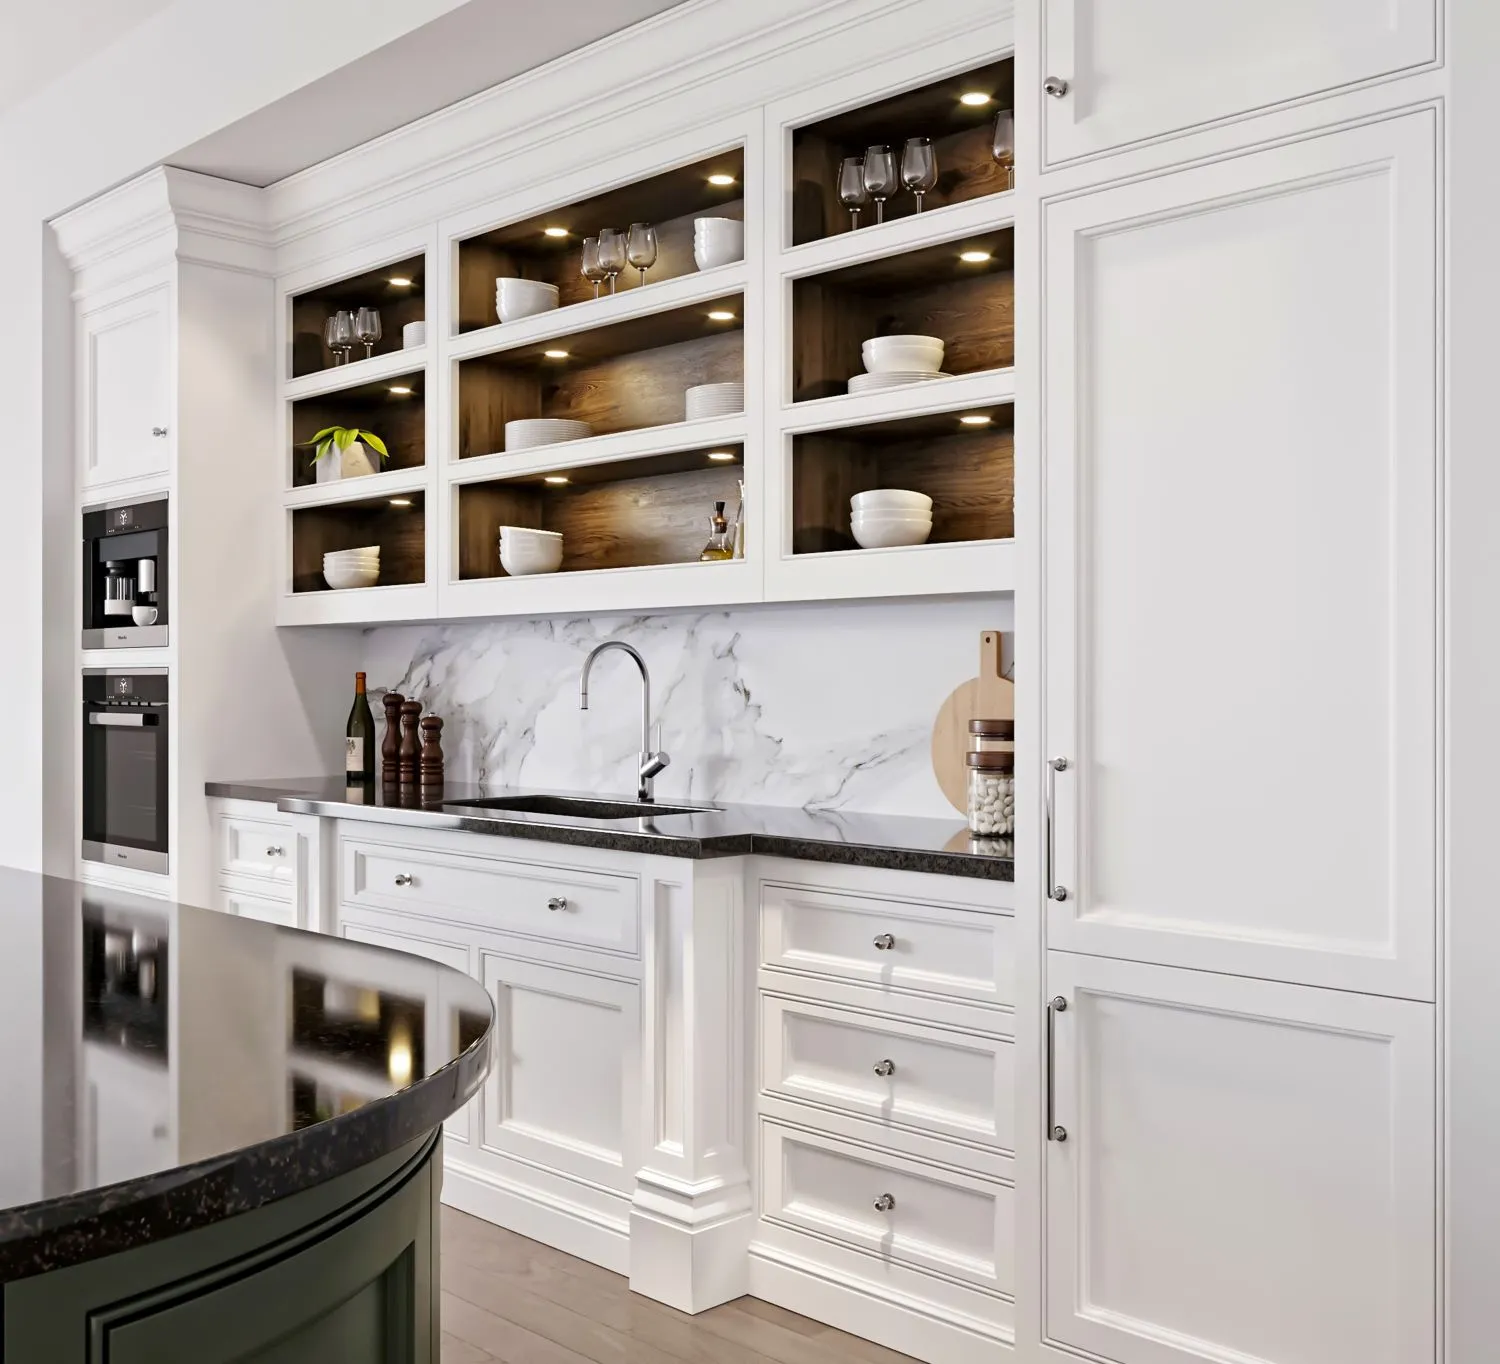 Adding pantry cabinets to your kitchen is a practical and effective way to enhance storage